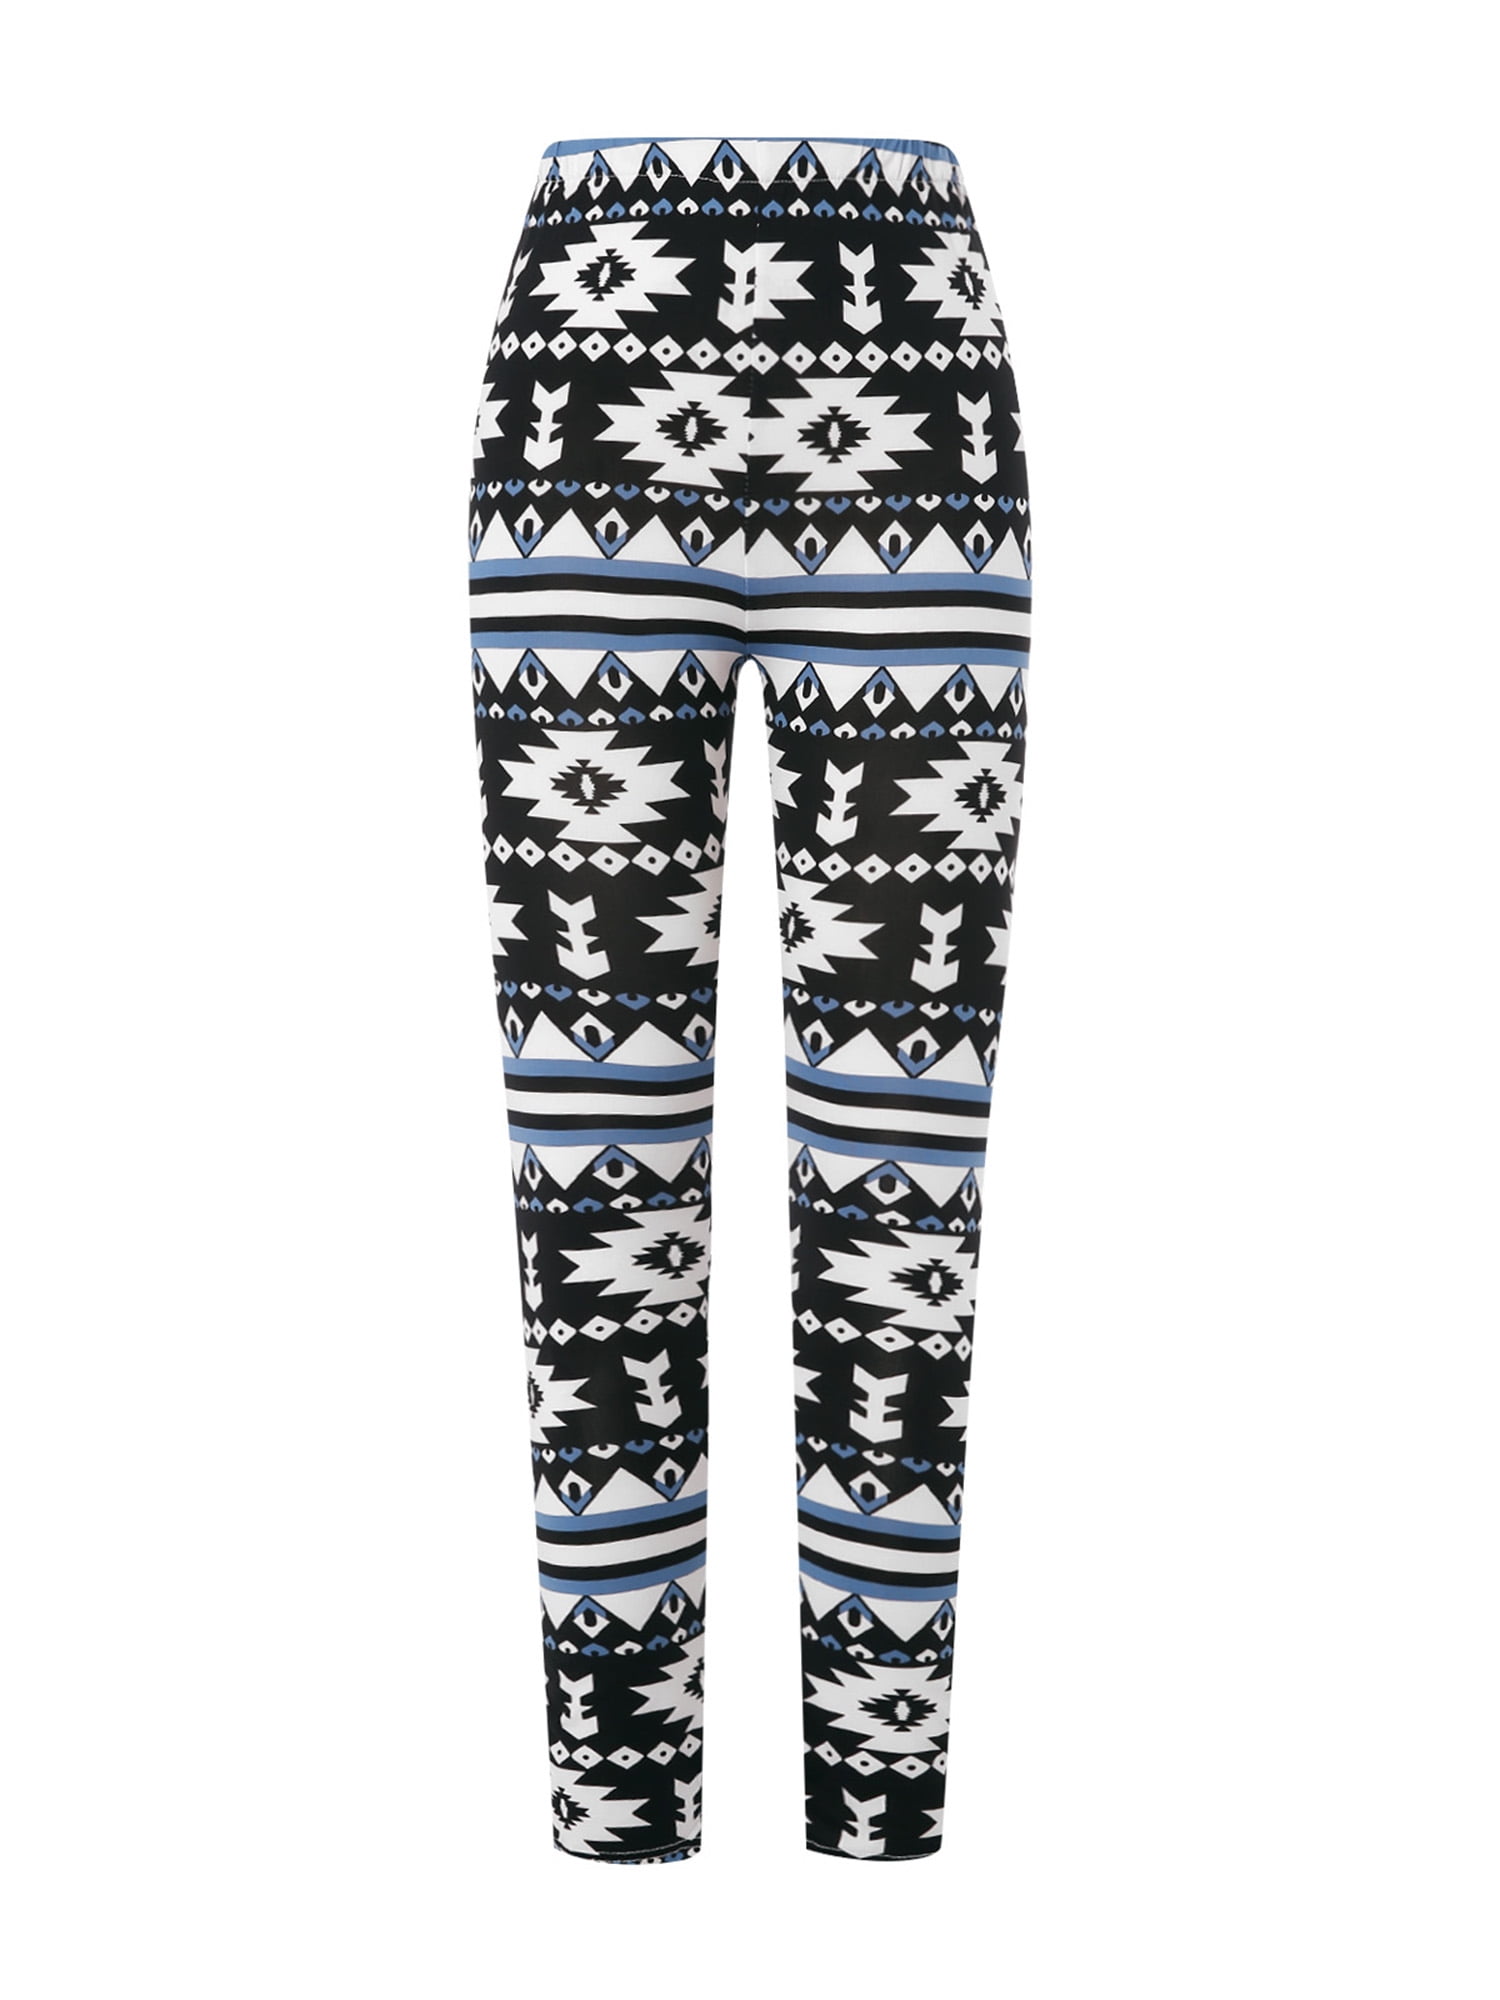 Chic Women's Geometrical Christmas Pattern Leggings  Christmas leggings,  Aztec leggings, Matching family outfits